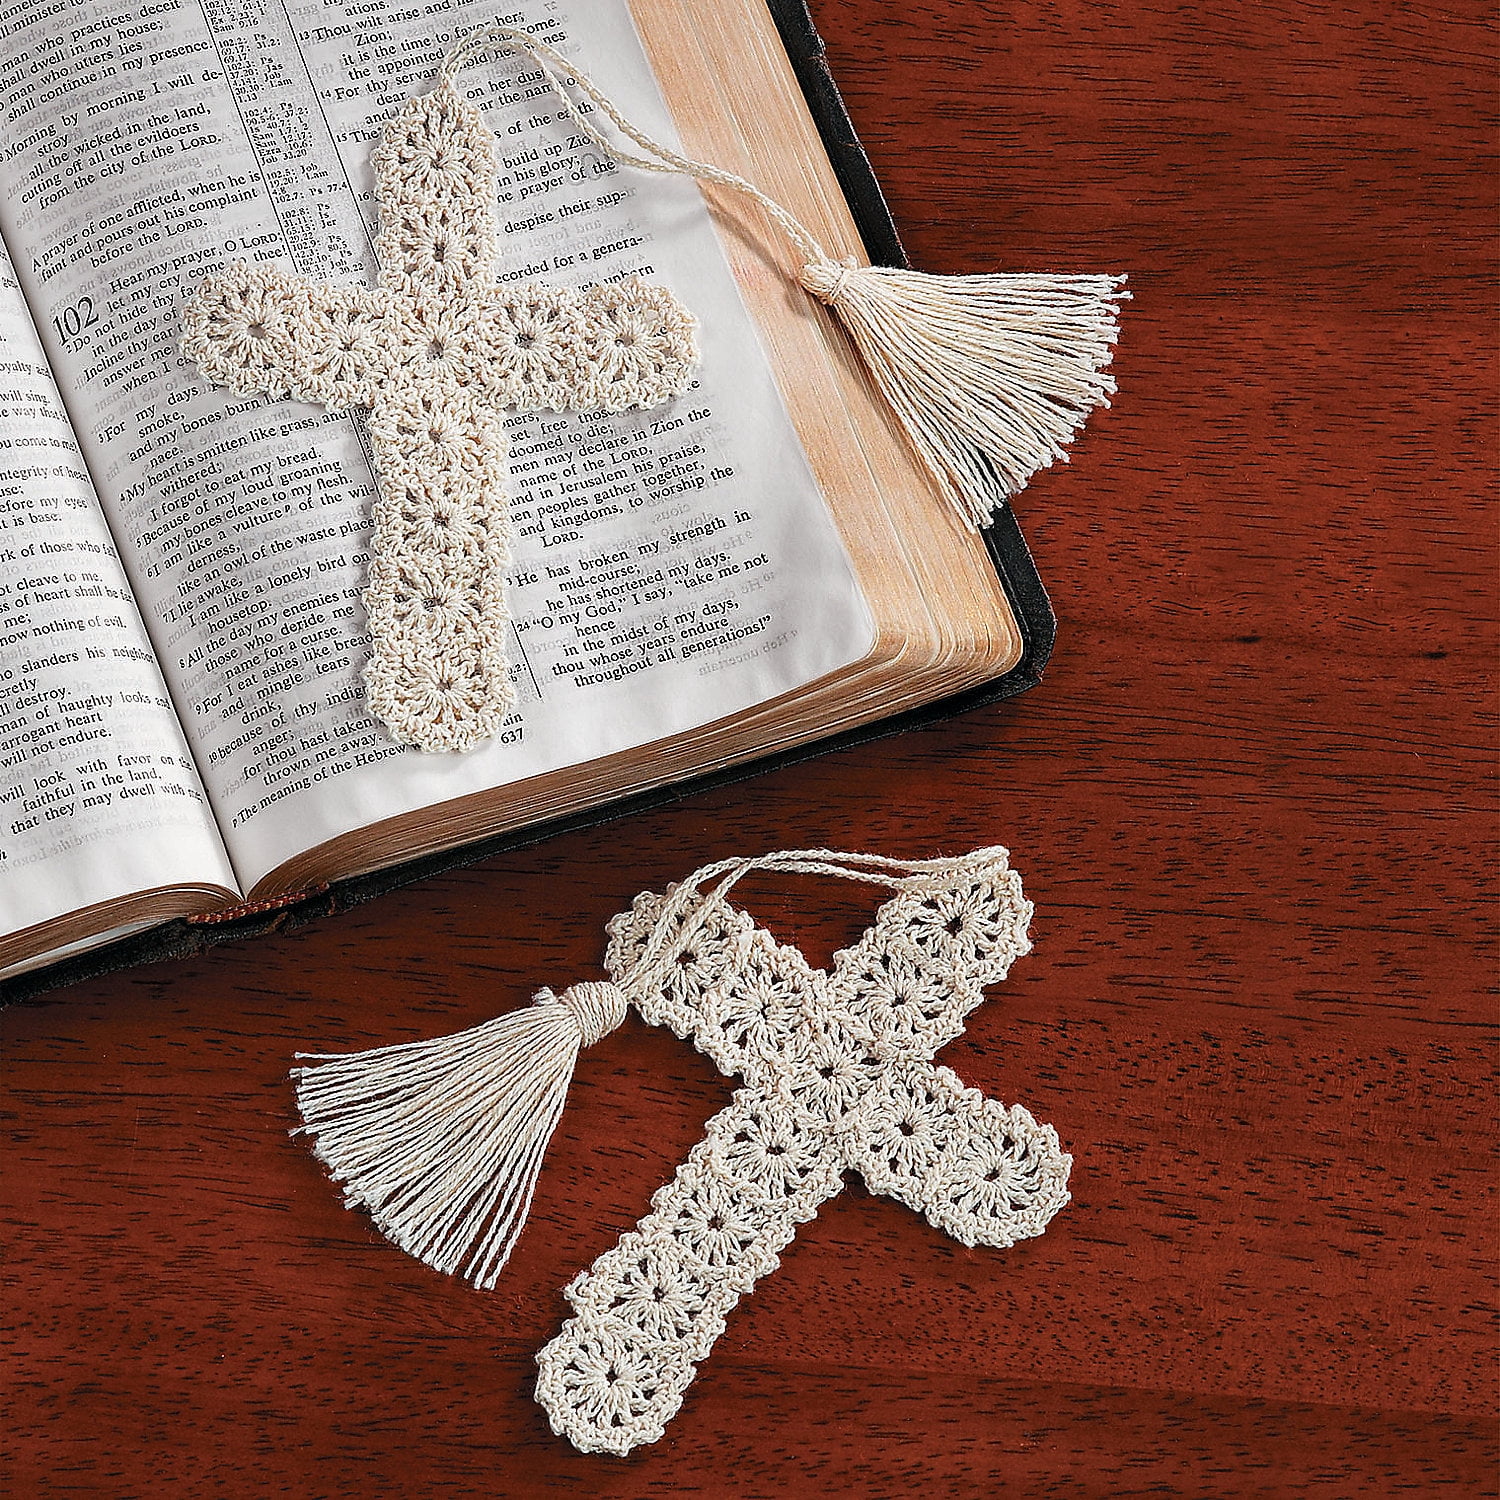 crocheted-cross-bookmarks-12pc-stationery-12-pieces-walmart